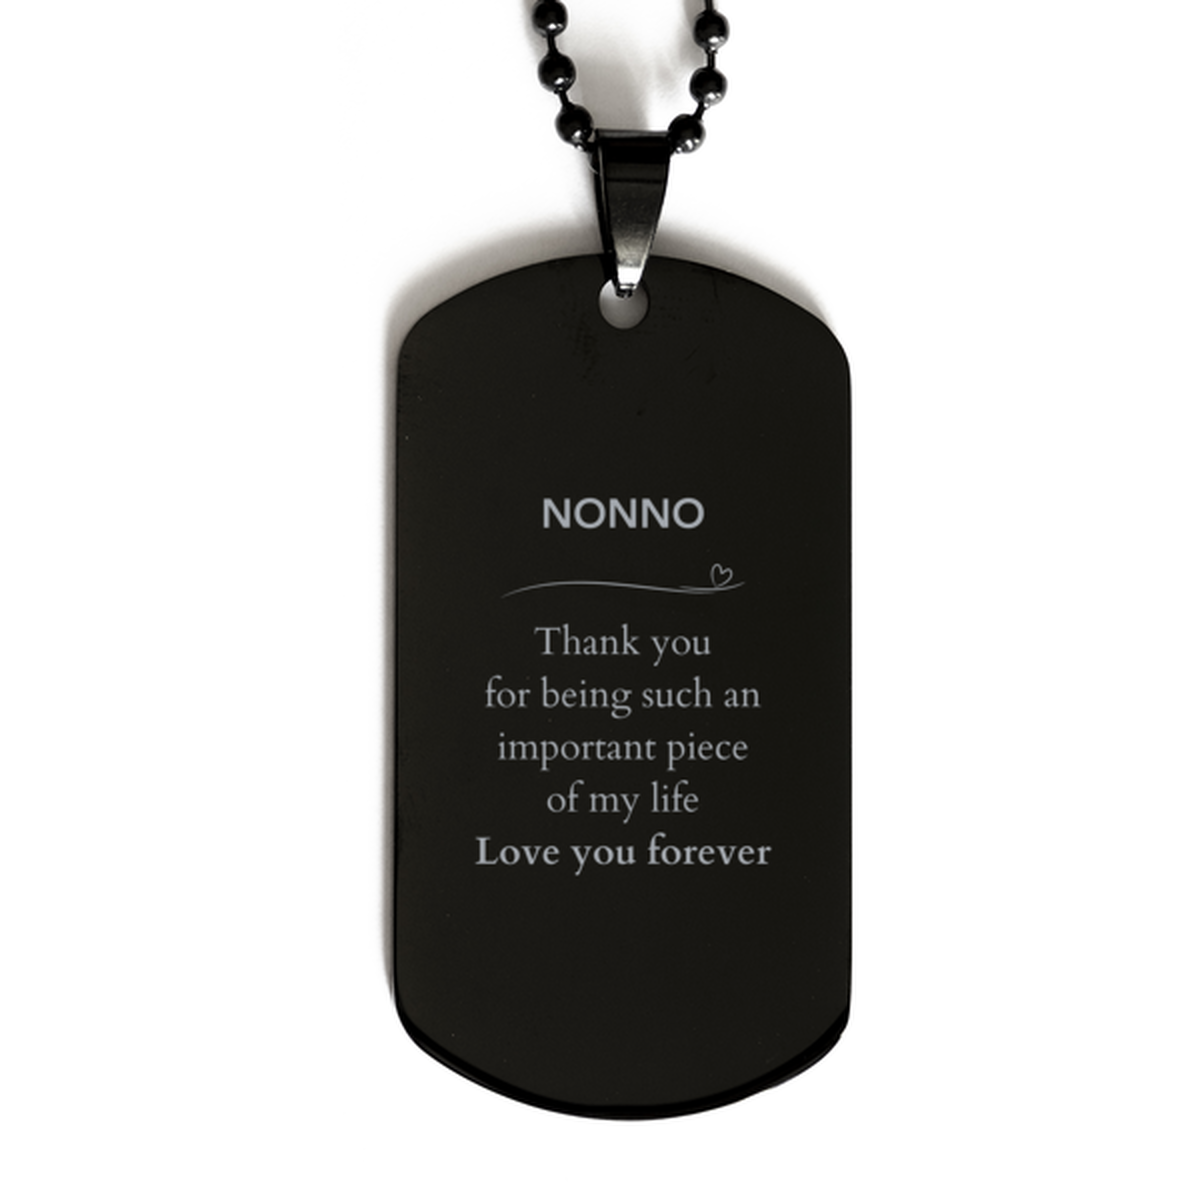 Appropriate Nonno Black Dog Tag Epic Birthday Gifts for Nonno Thank you for being such an important piece of my life Nonno Christmas Mothers Fathers Day